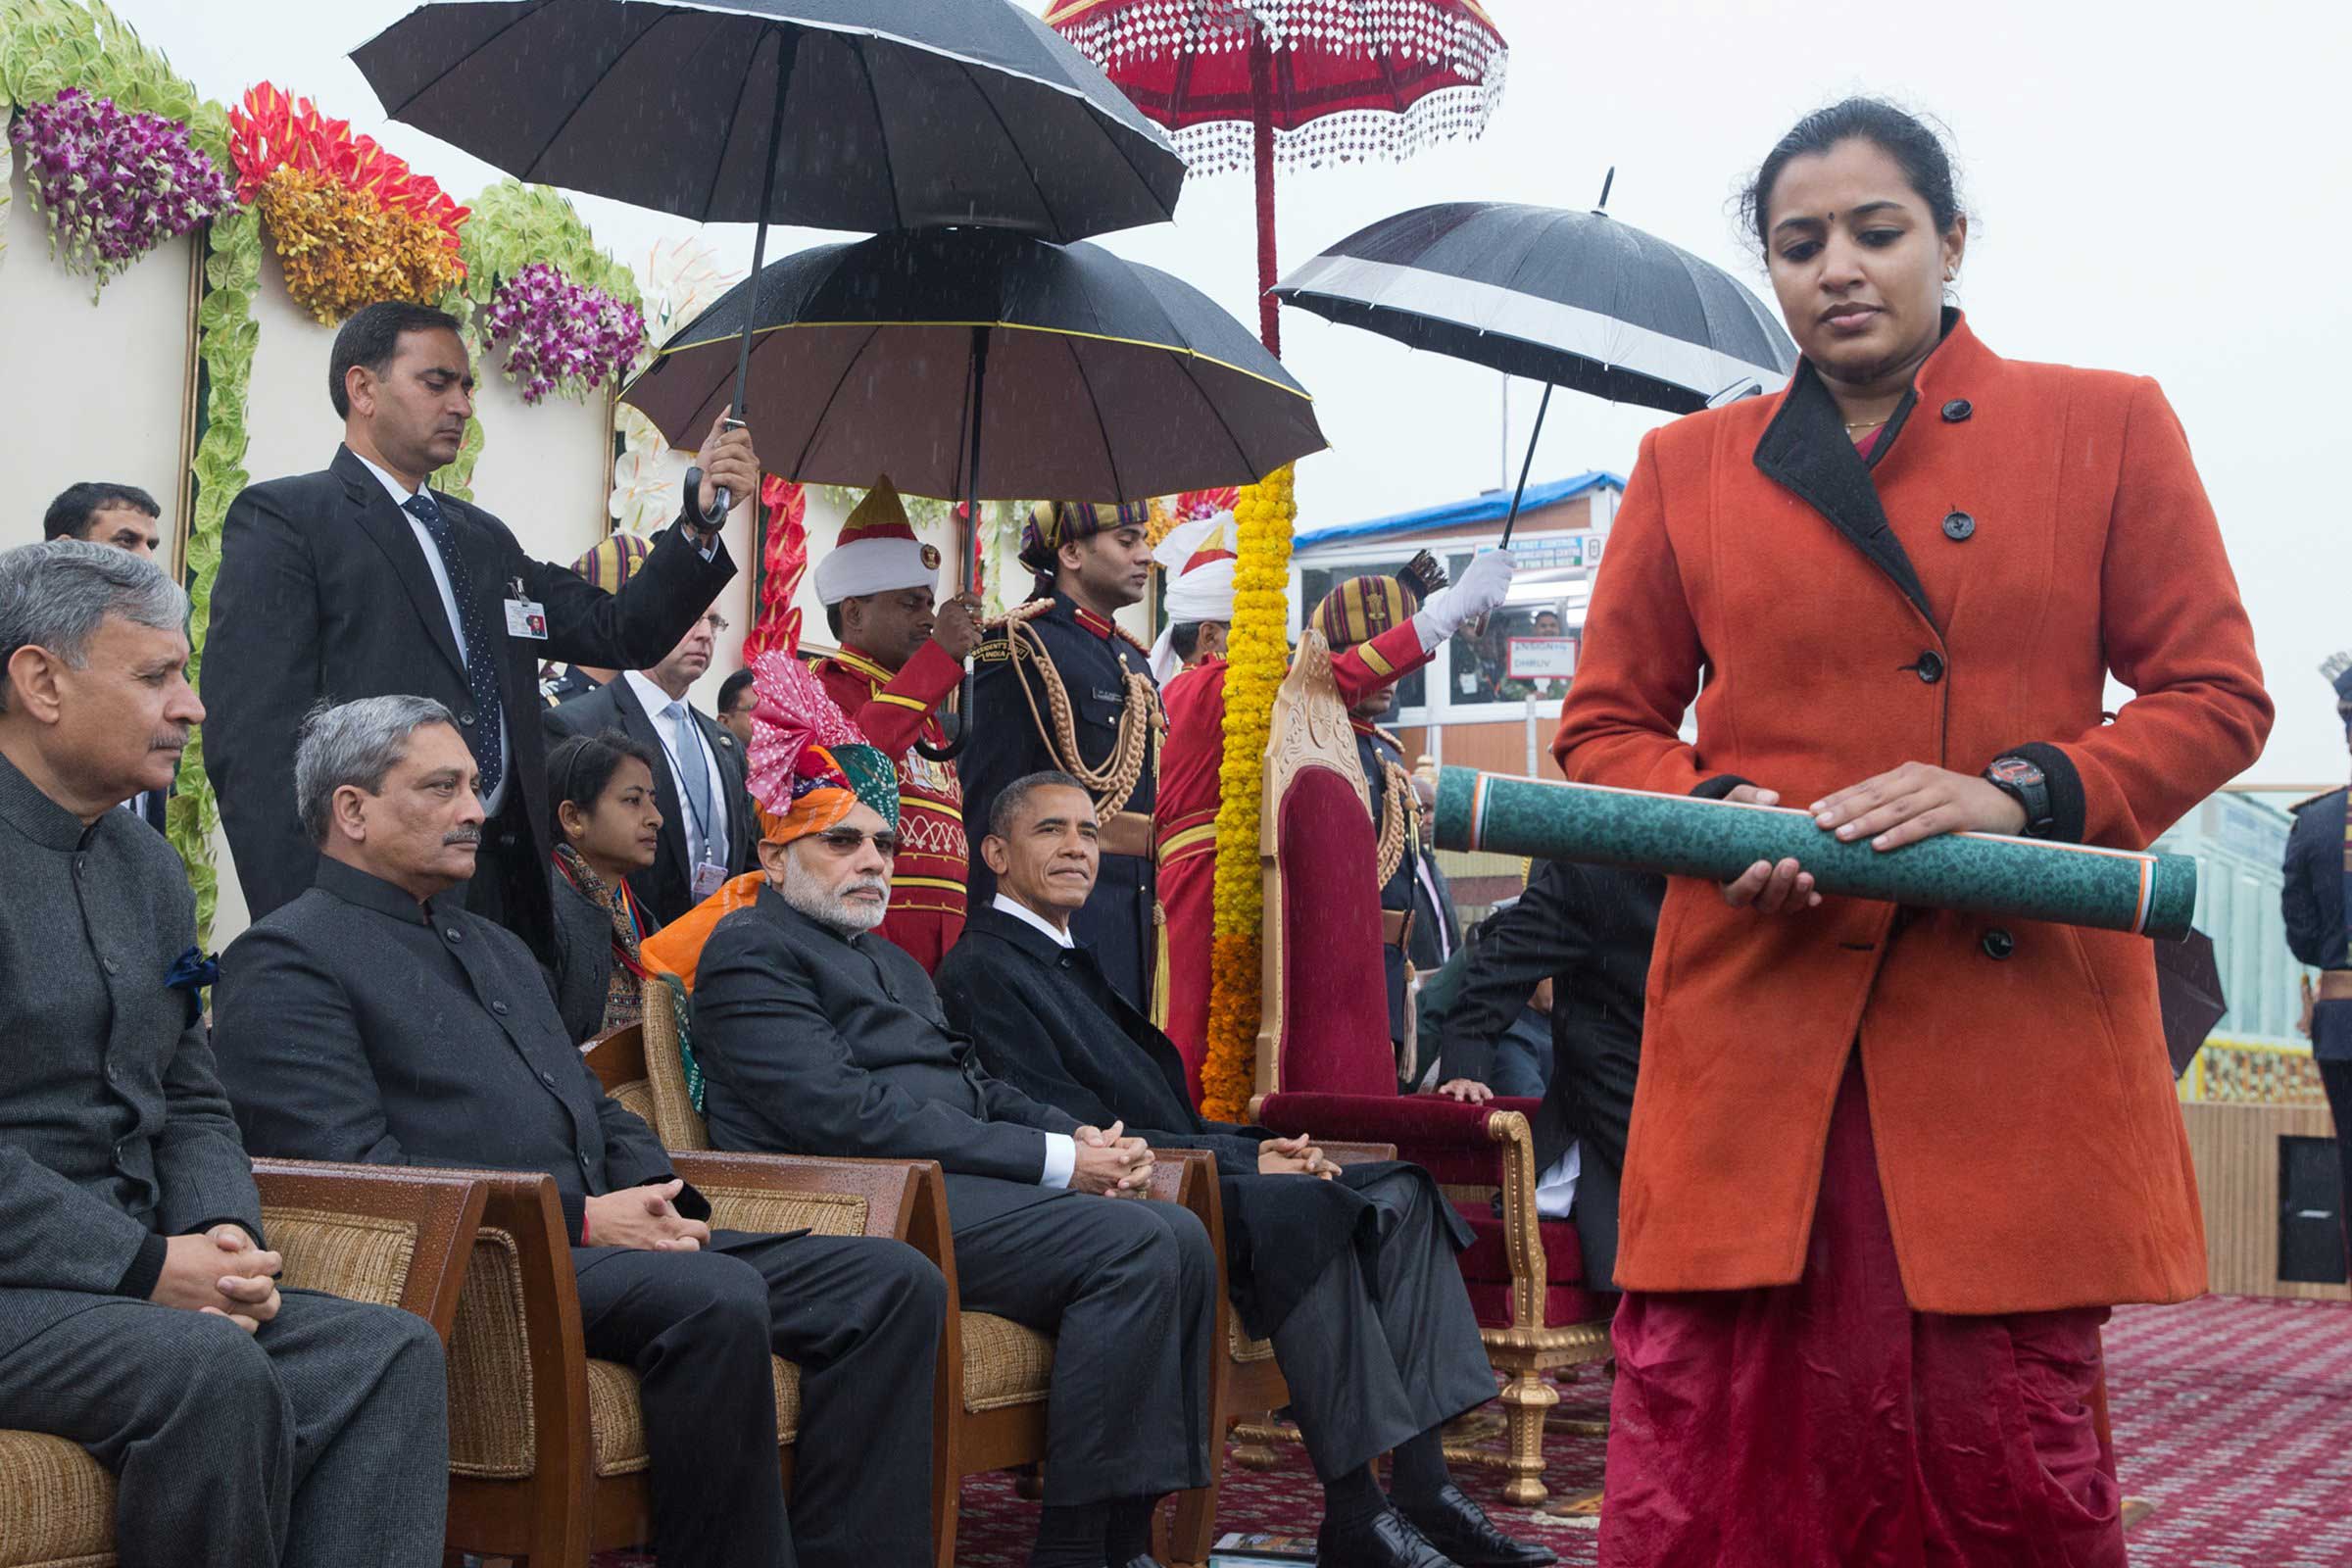 President Barack Obama and Indian Prime Minister Narendra Modi watch an award ceremony and parade from their viewing stand overlooking the Republic Day parade in New Delhi,  Jan. 26, 2015.